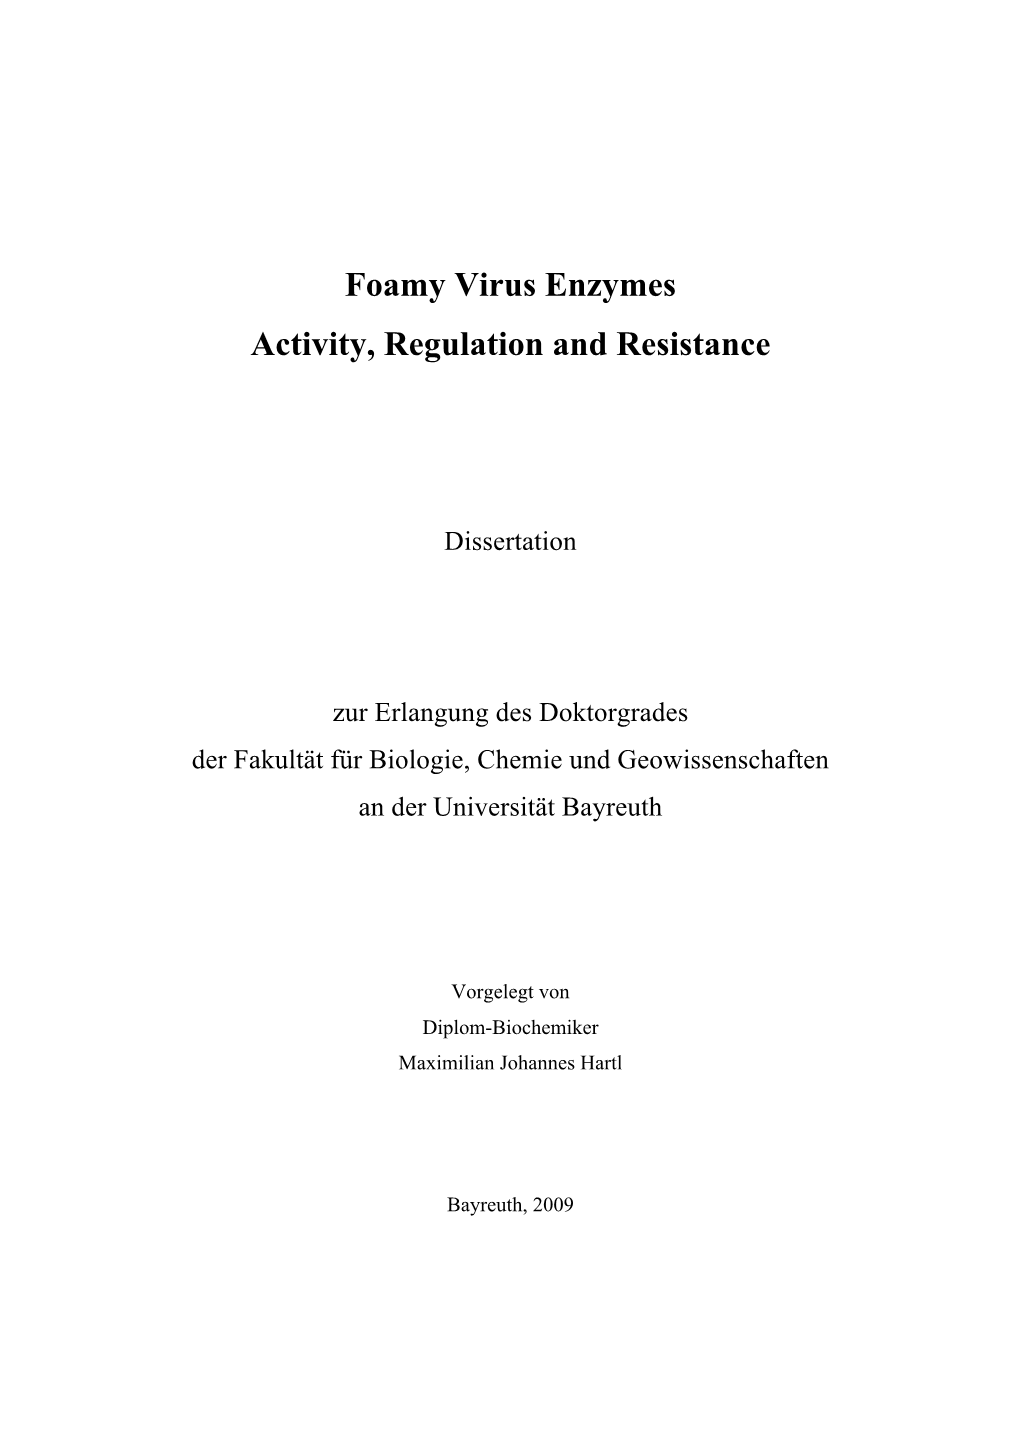 Foamy Virus Enzymes Activity, Regulation and Resistance